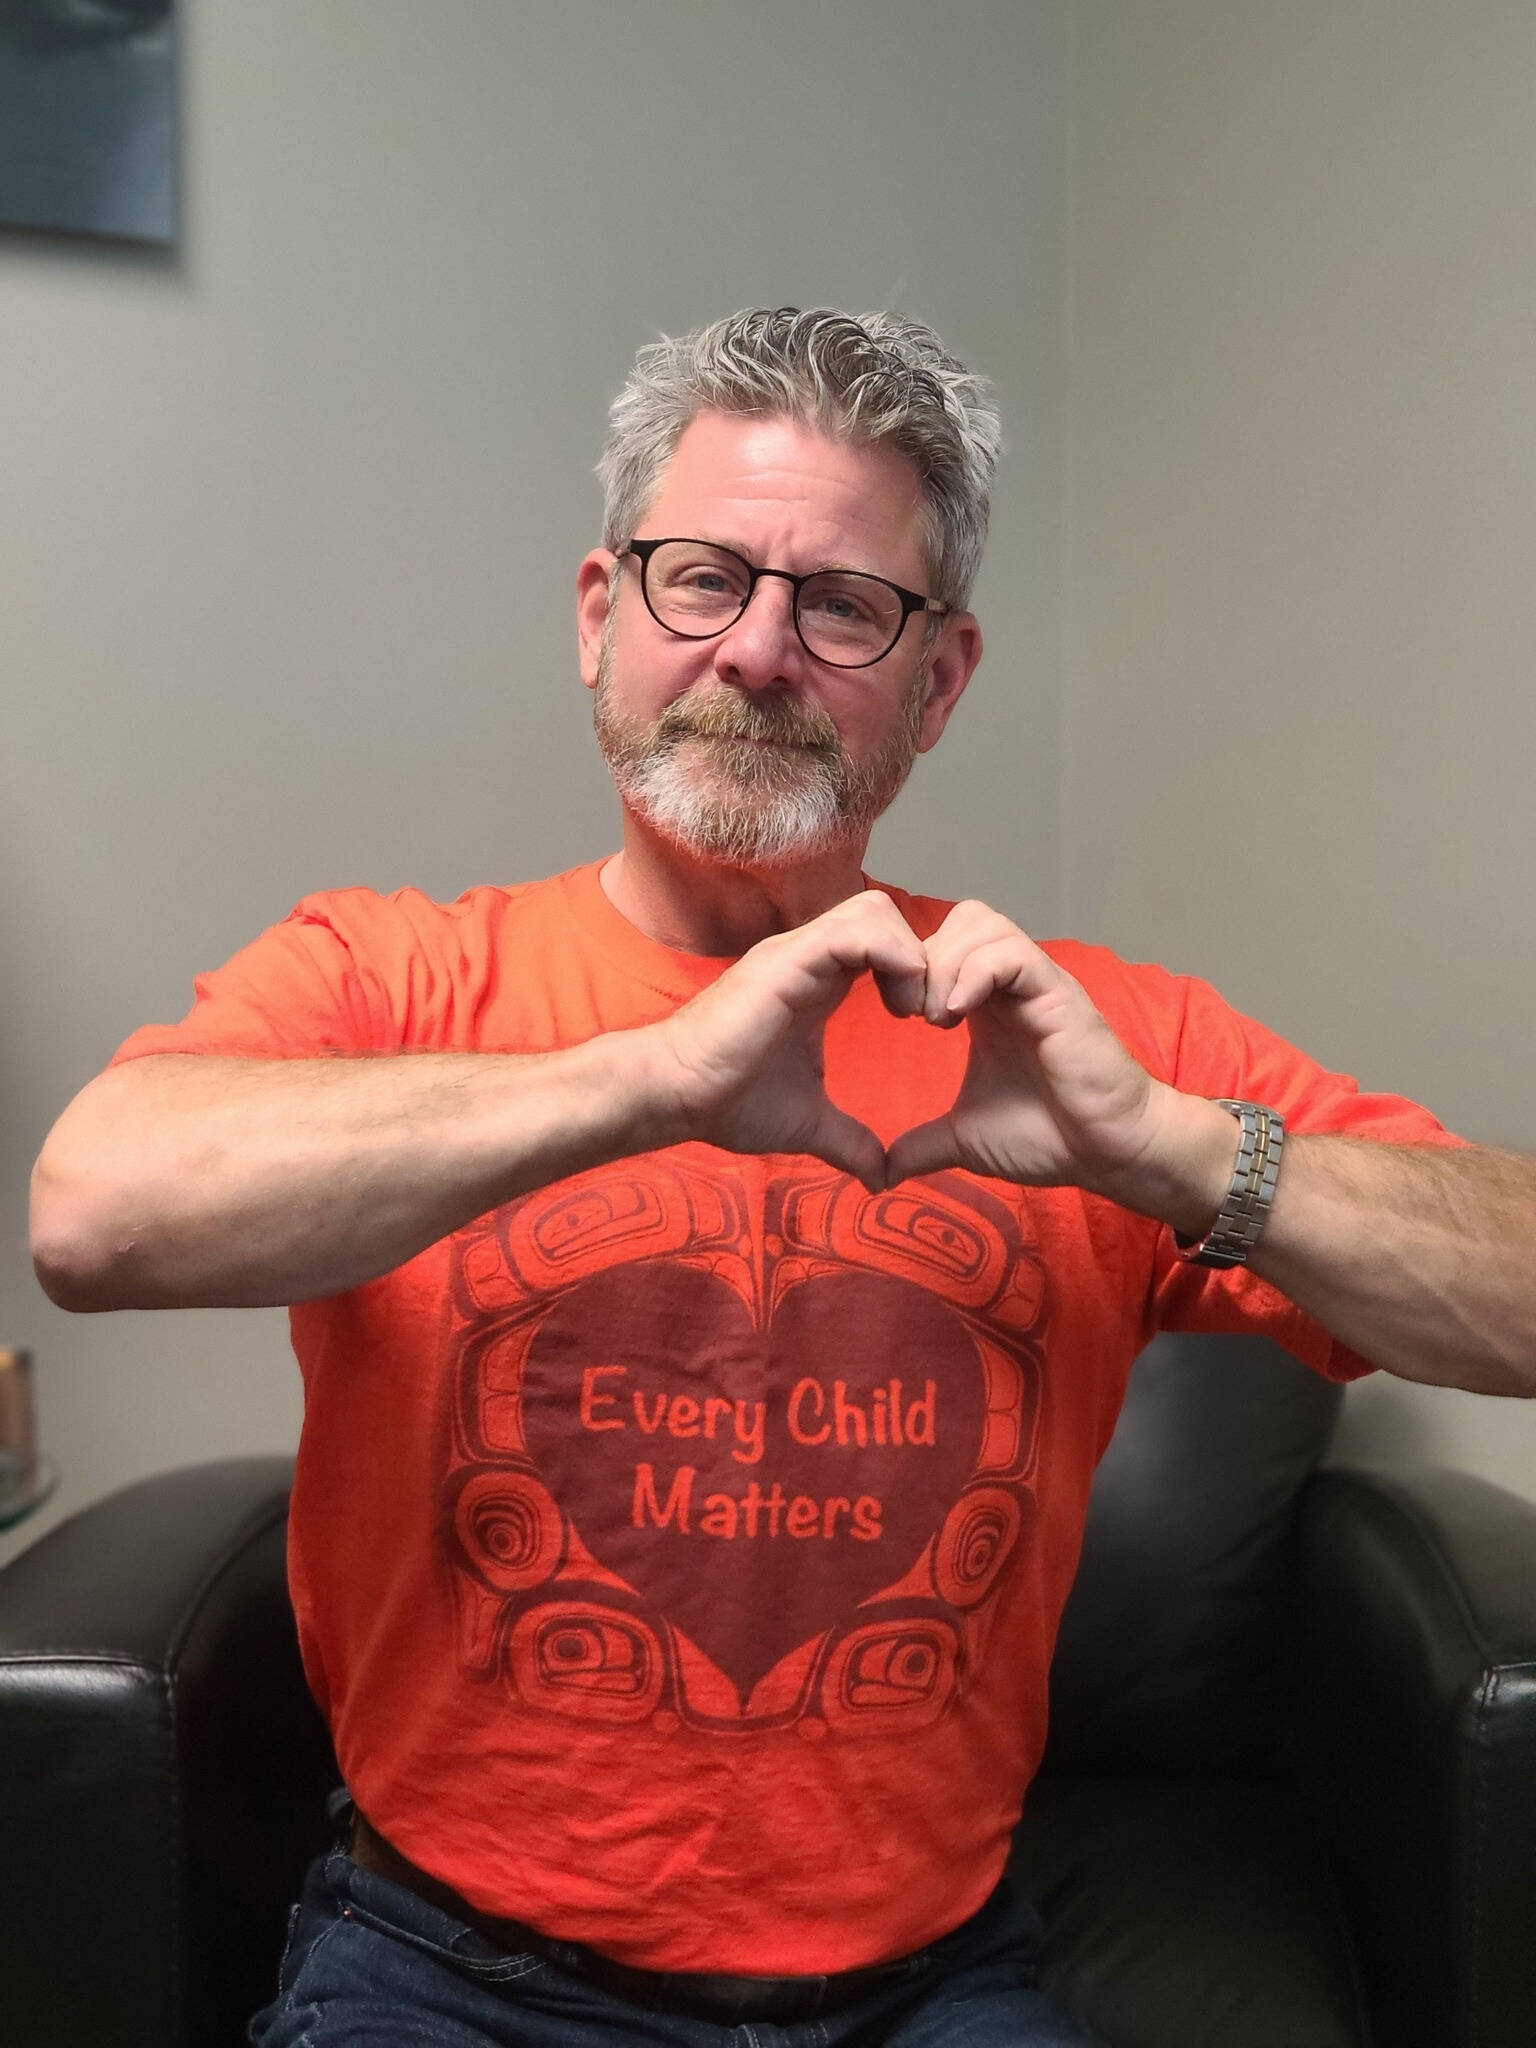 Abbotsford South MLA Bruce Banman, who recently left BC United for the BC Conservative Party, poses for the National Day for Truth and Reconciliation in an orange shirt. (Facebook/Bruce Banman MLA Abbotsford South)